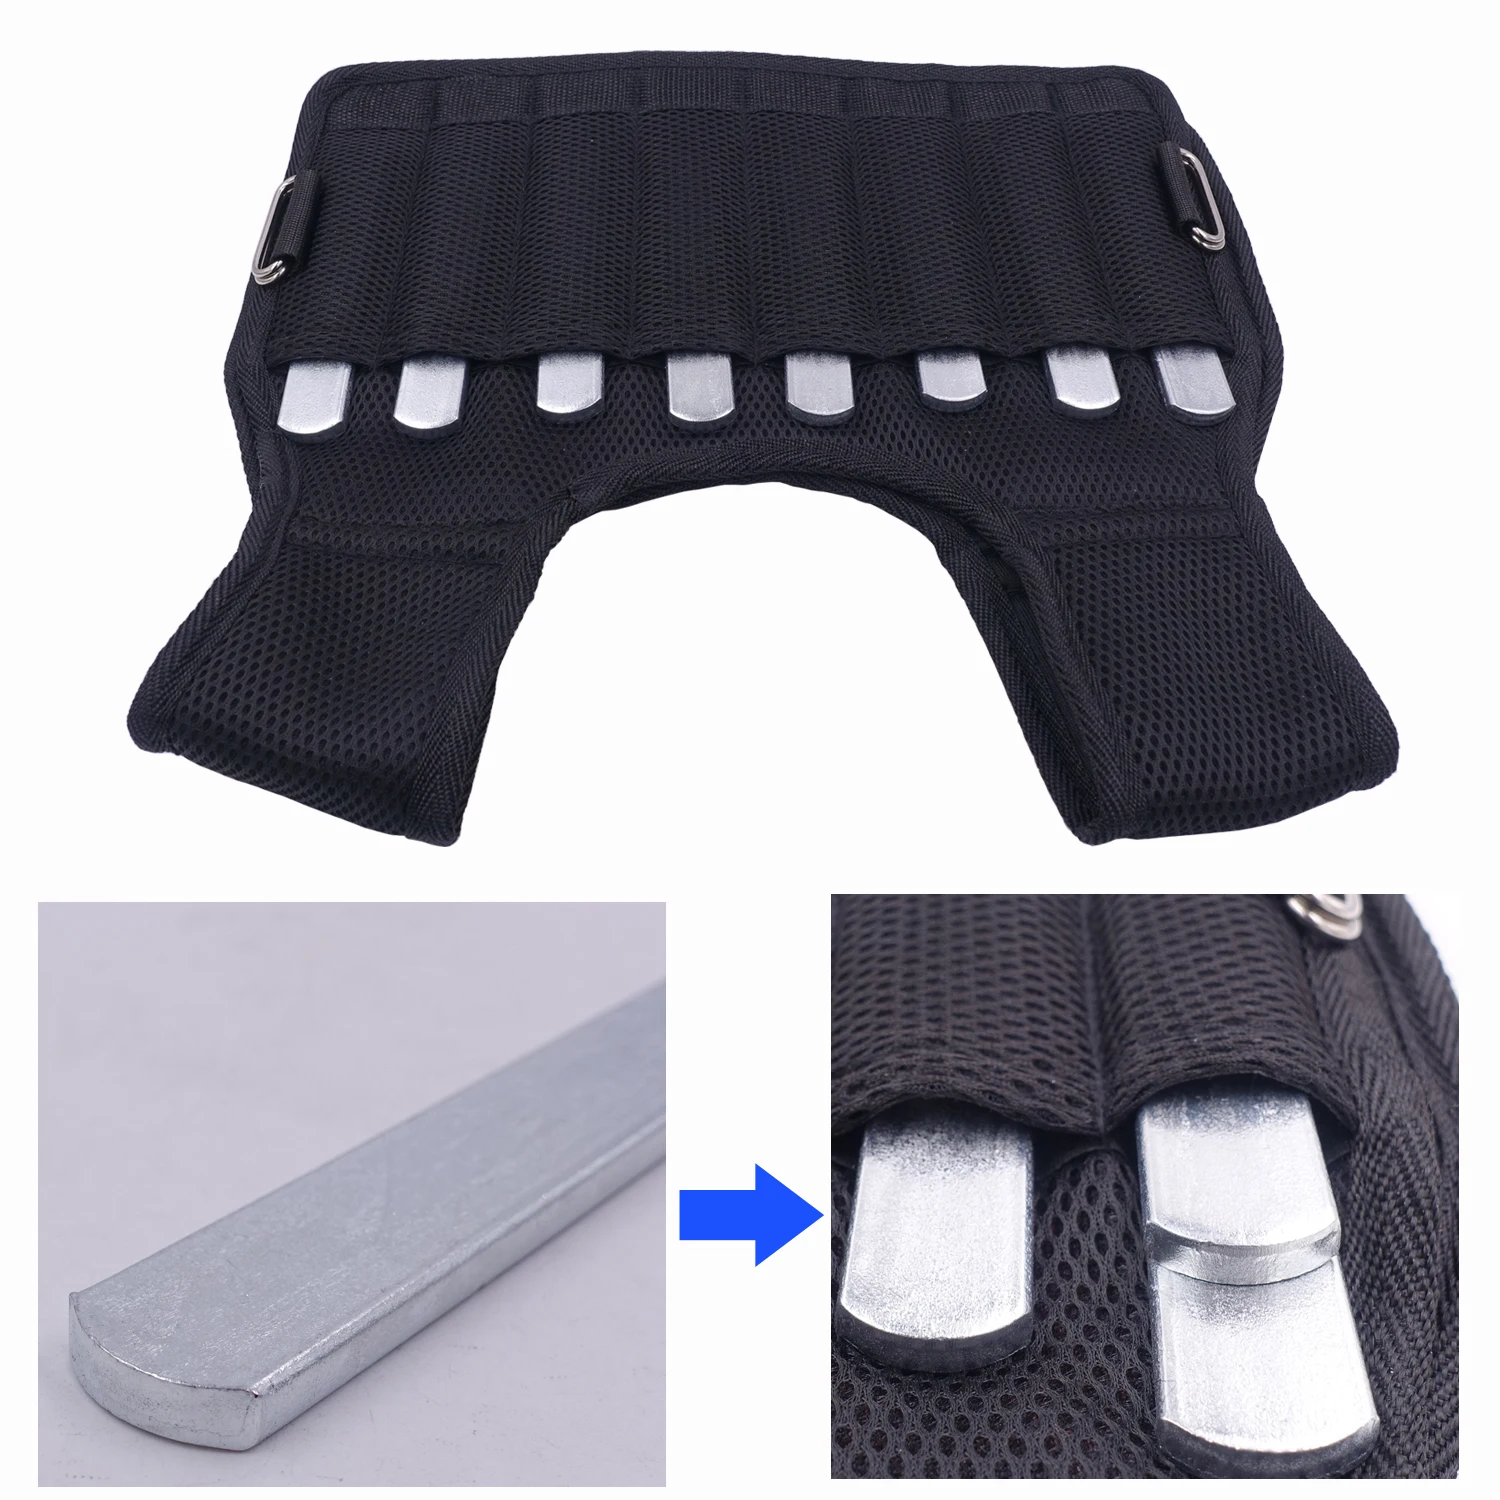 Weight Steel Plate Load-Bearing Adjustable Training Accessories For Weighted Vest Ankle Leg Sport Strength Fitness Equipment